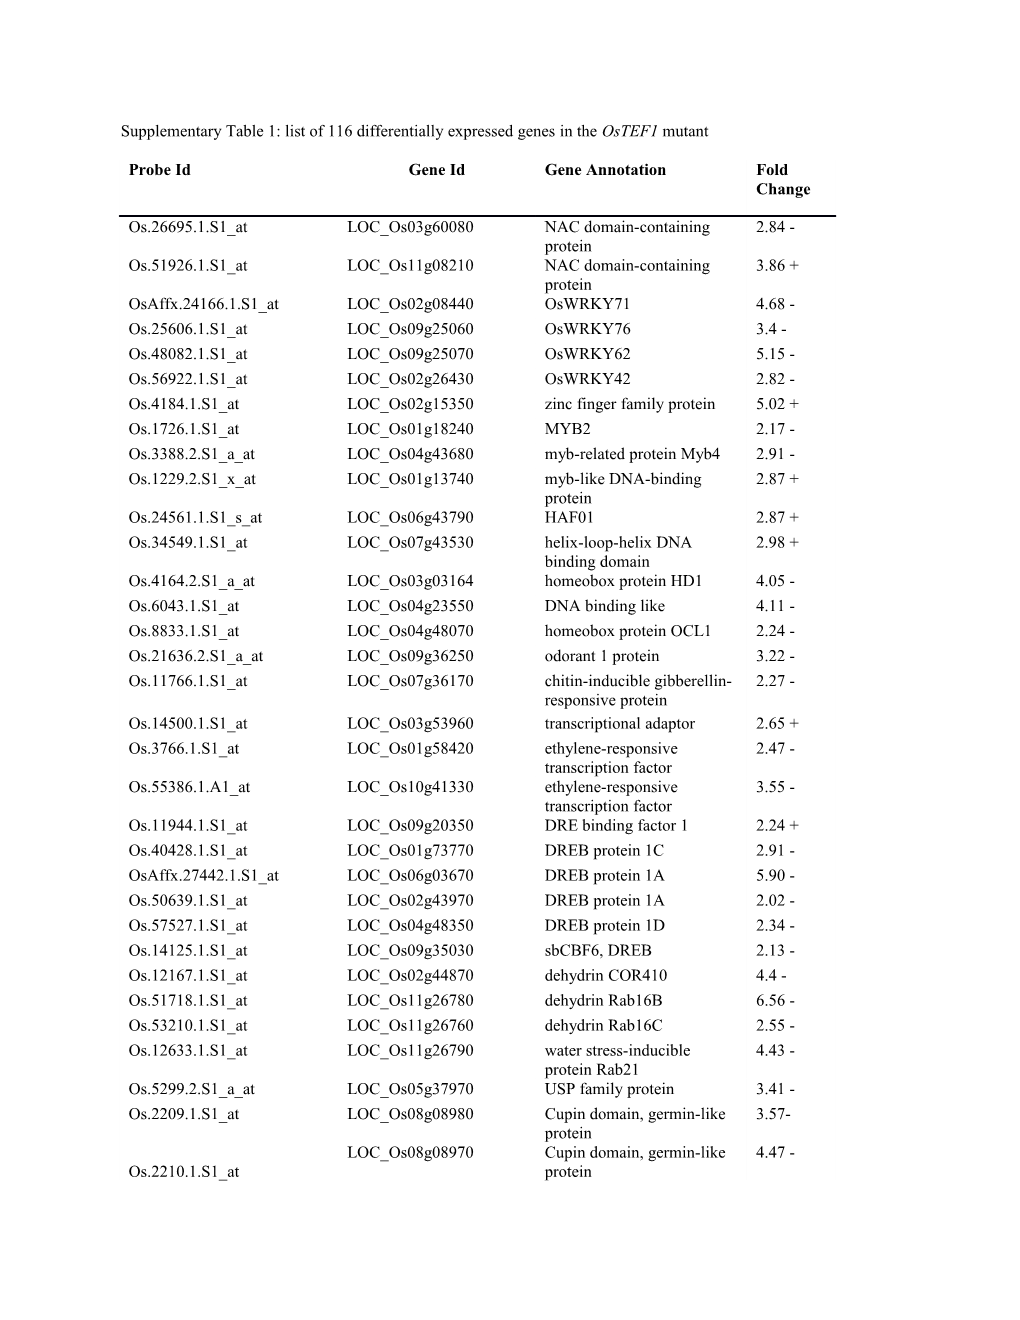 Supplementary Table 1: List of 116 Differentially Expressed Genes in the Ostef1 Mutant